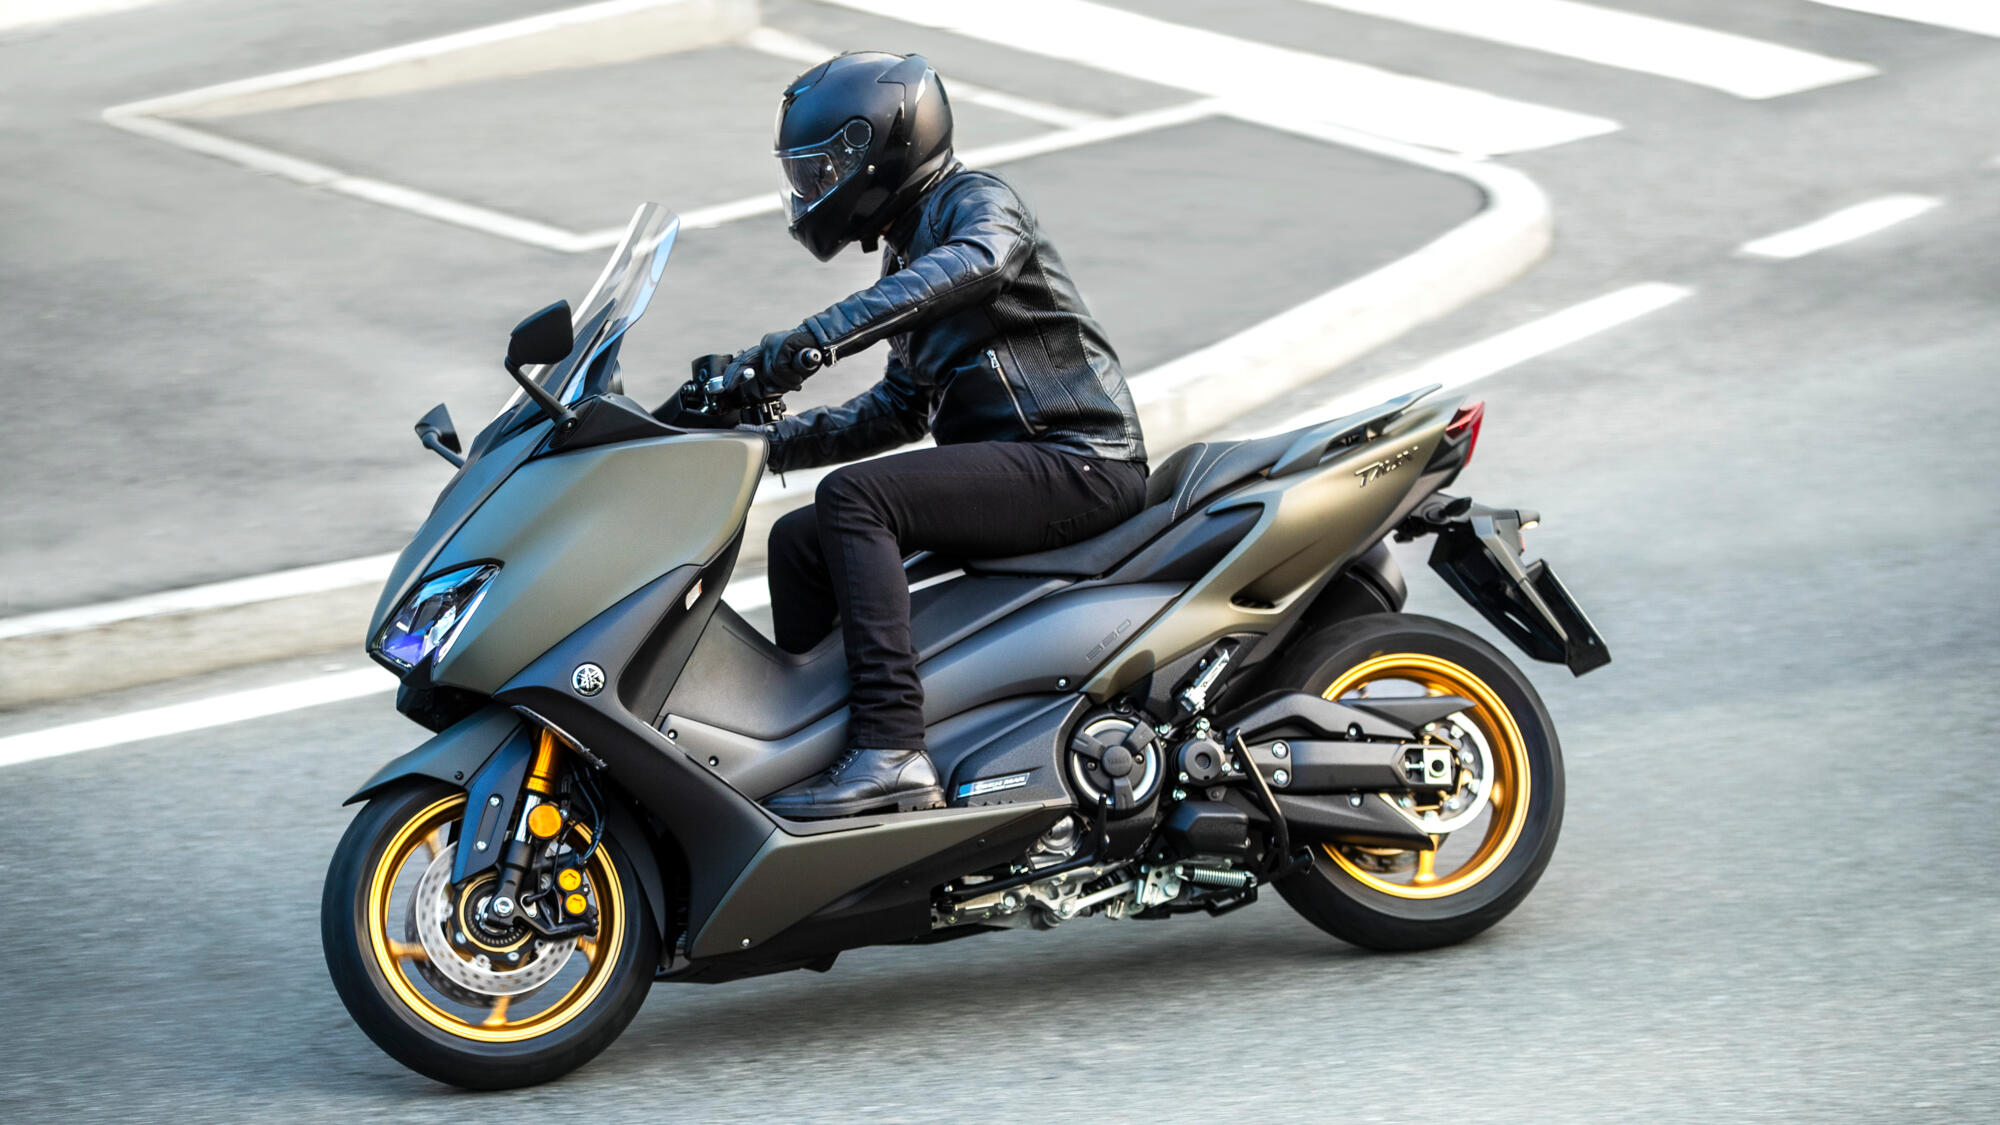 A rider on the Yamaha TMAX taking a corner